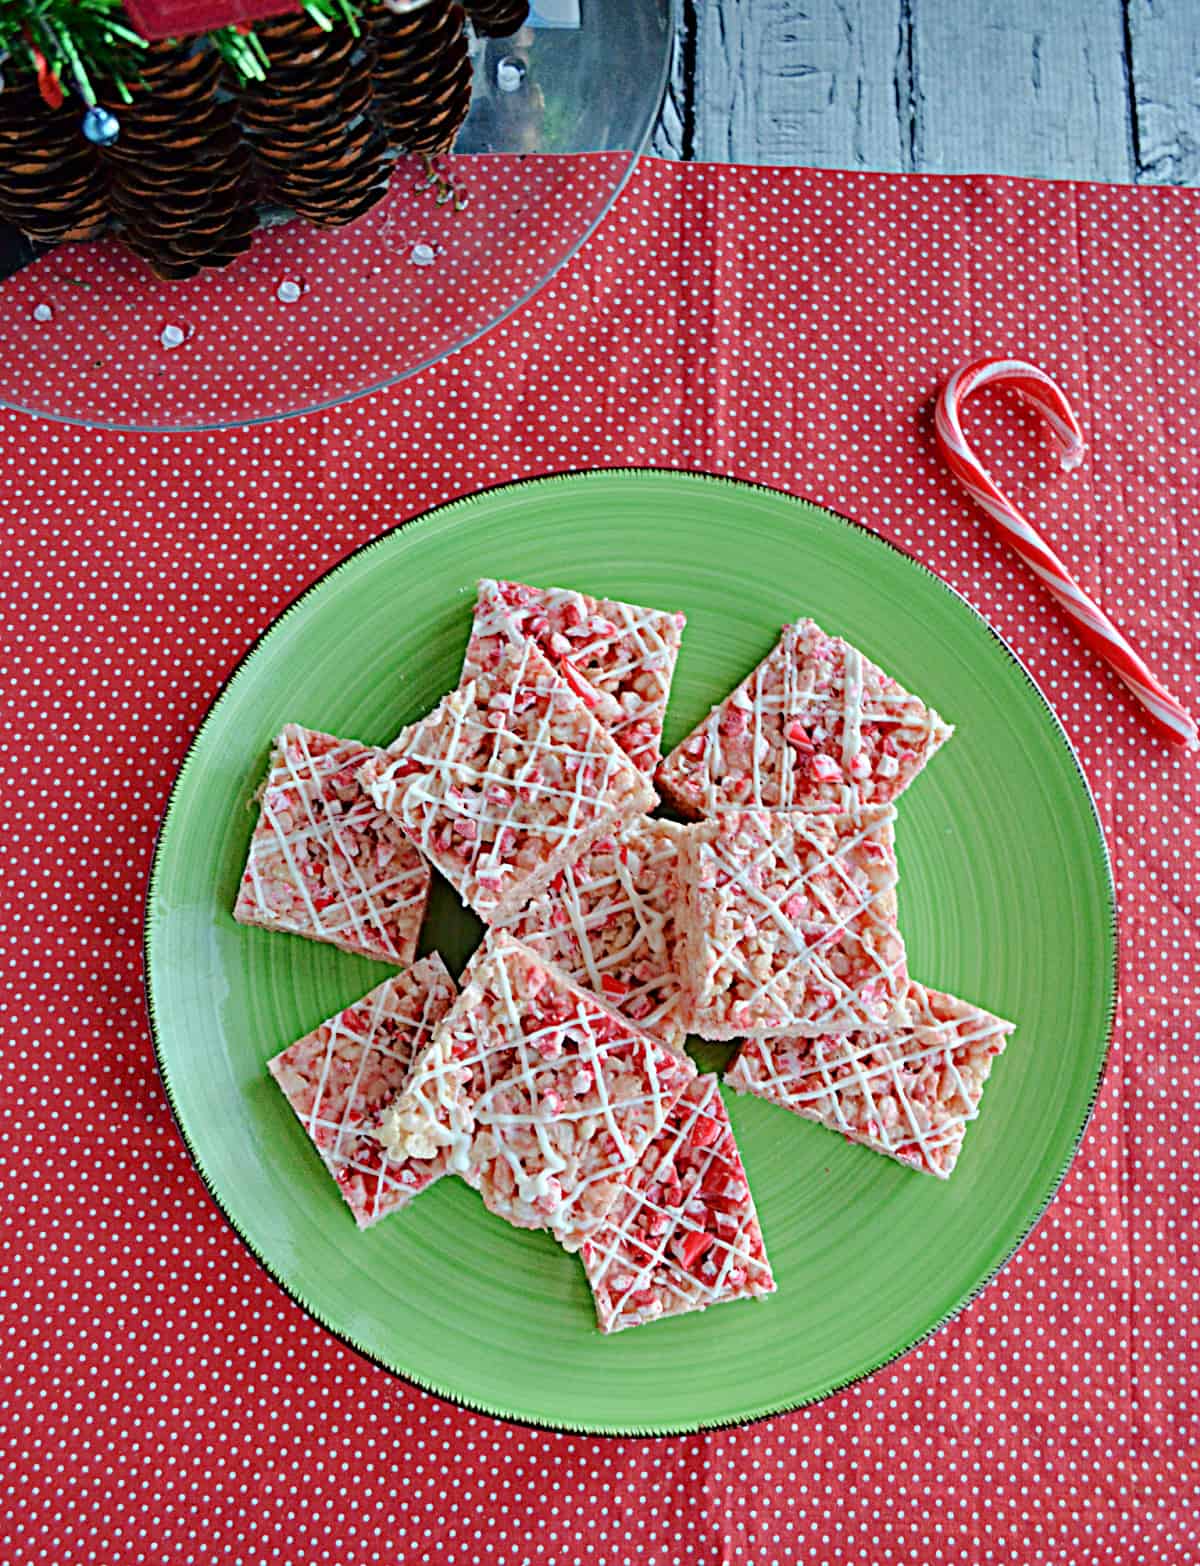 A plate of Candy Cane Rice Krispies Treats with a candy cane beside the plate.